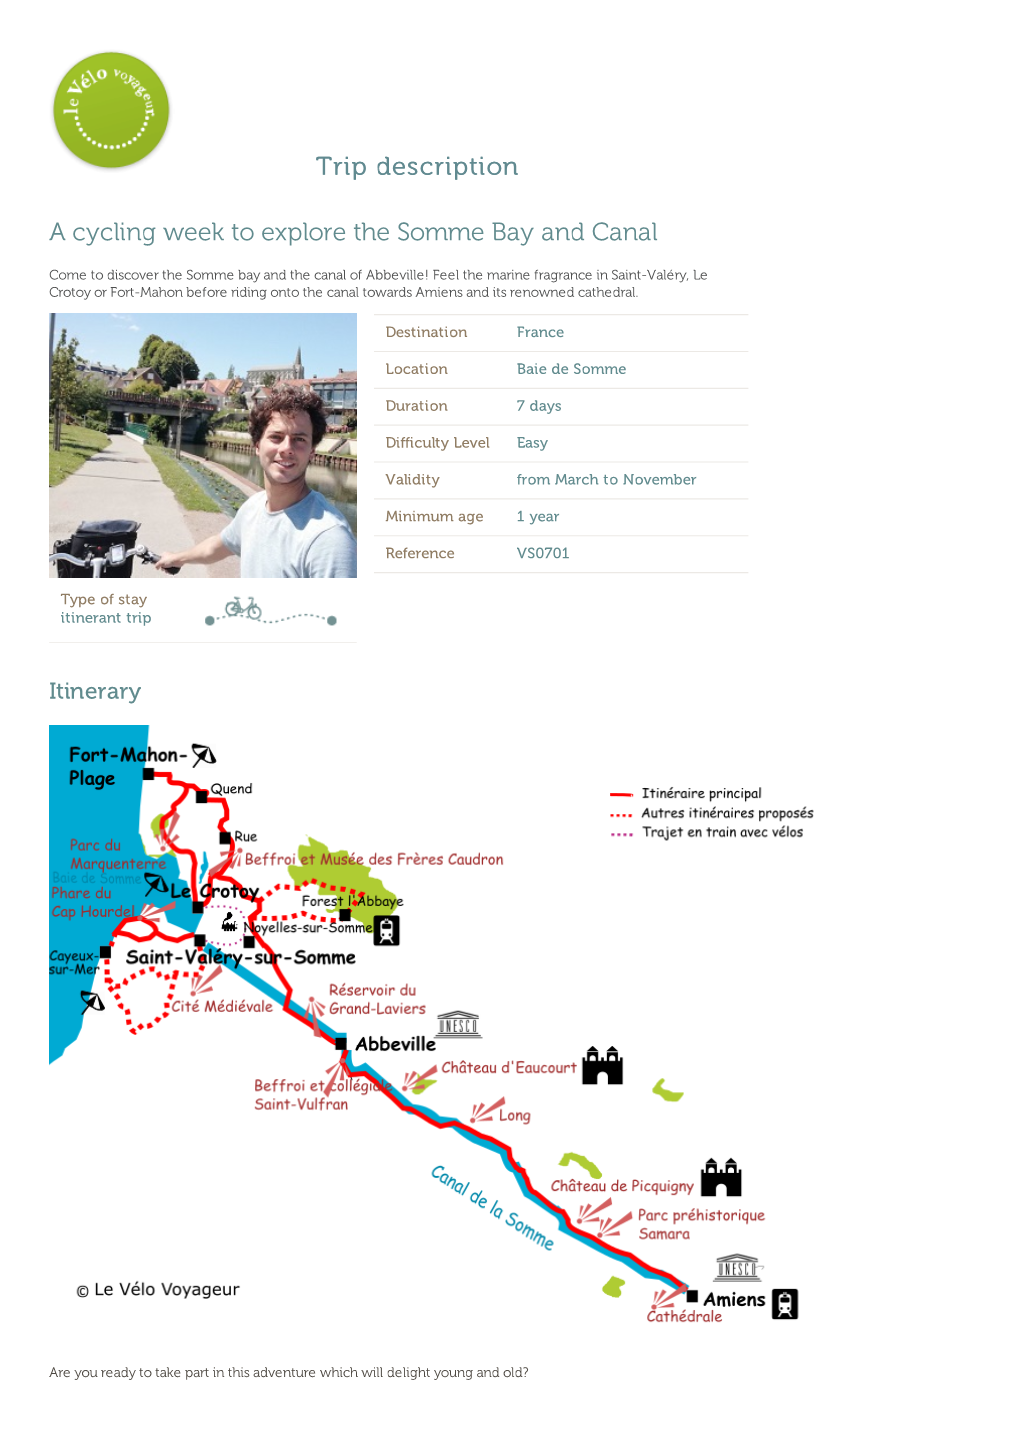 Trip Description a Cycling Week to Explore the Somme Bay and Canal